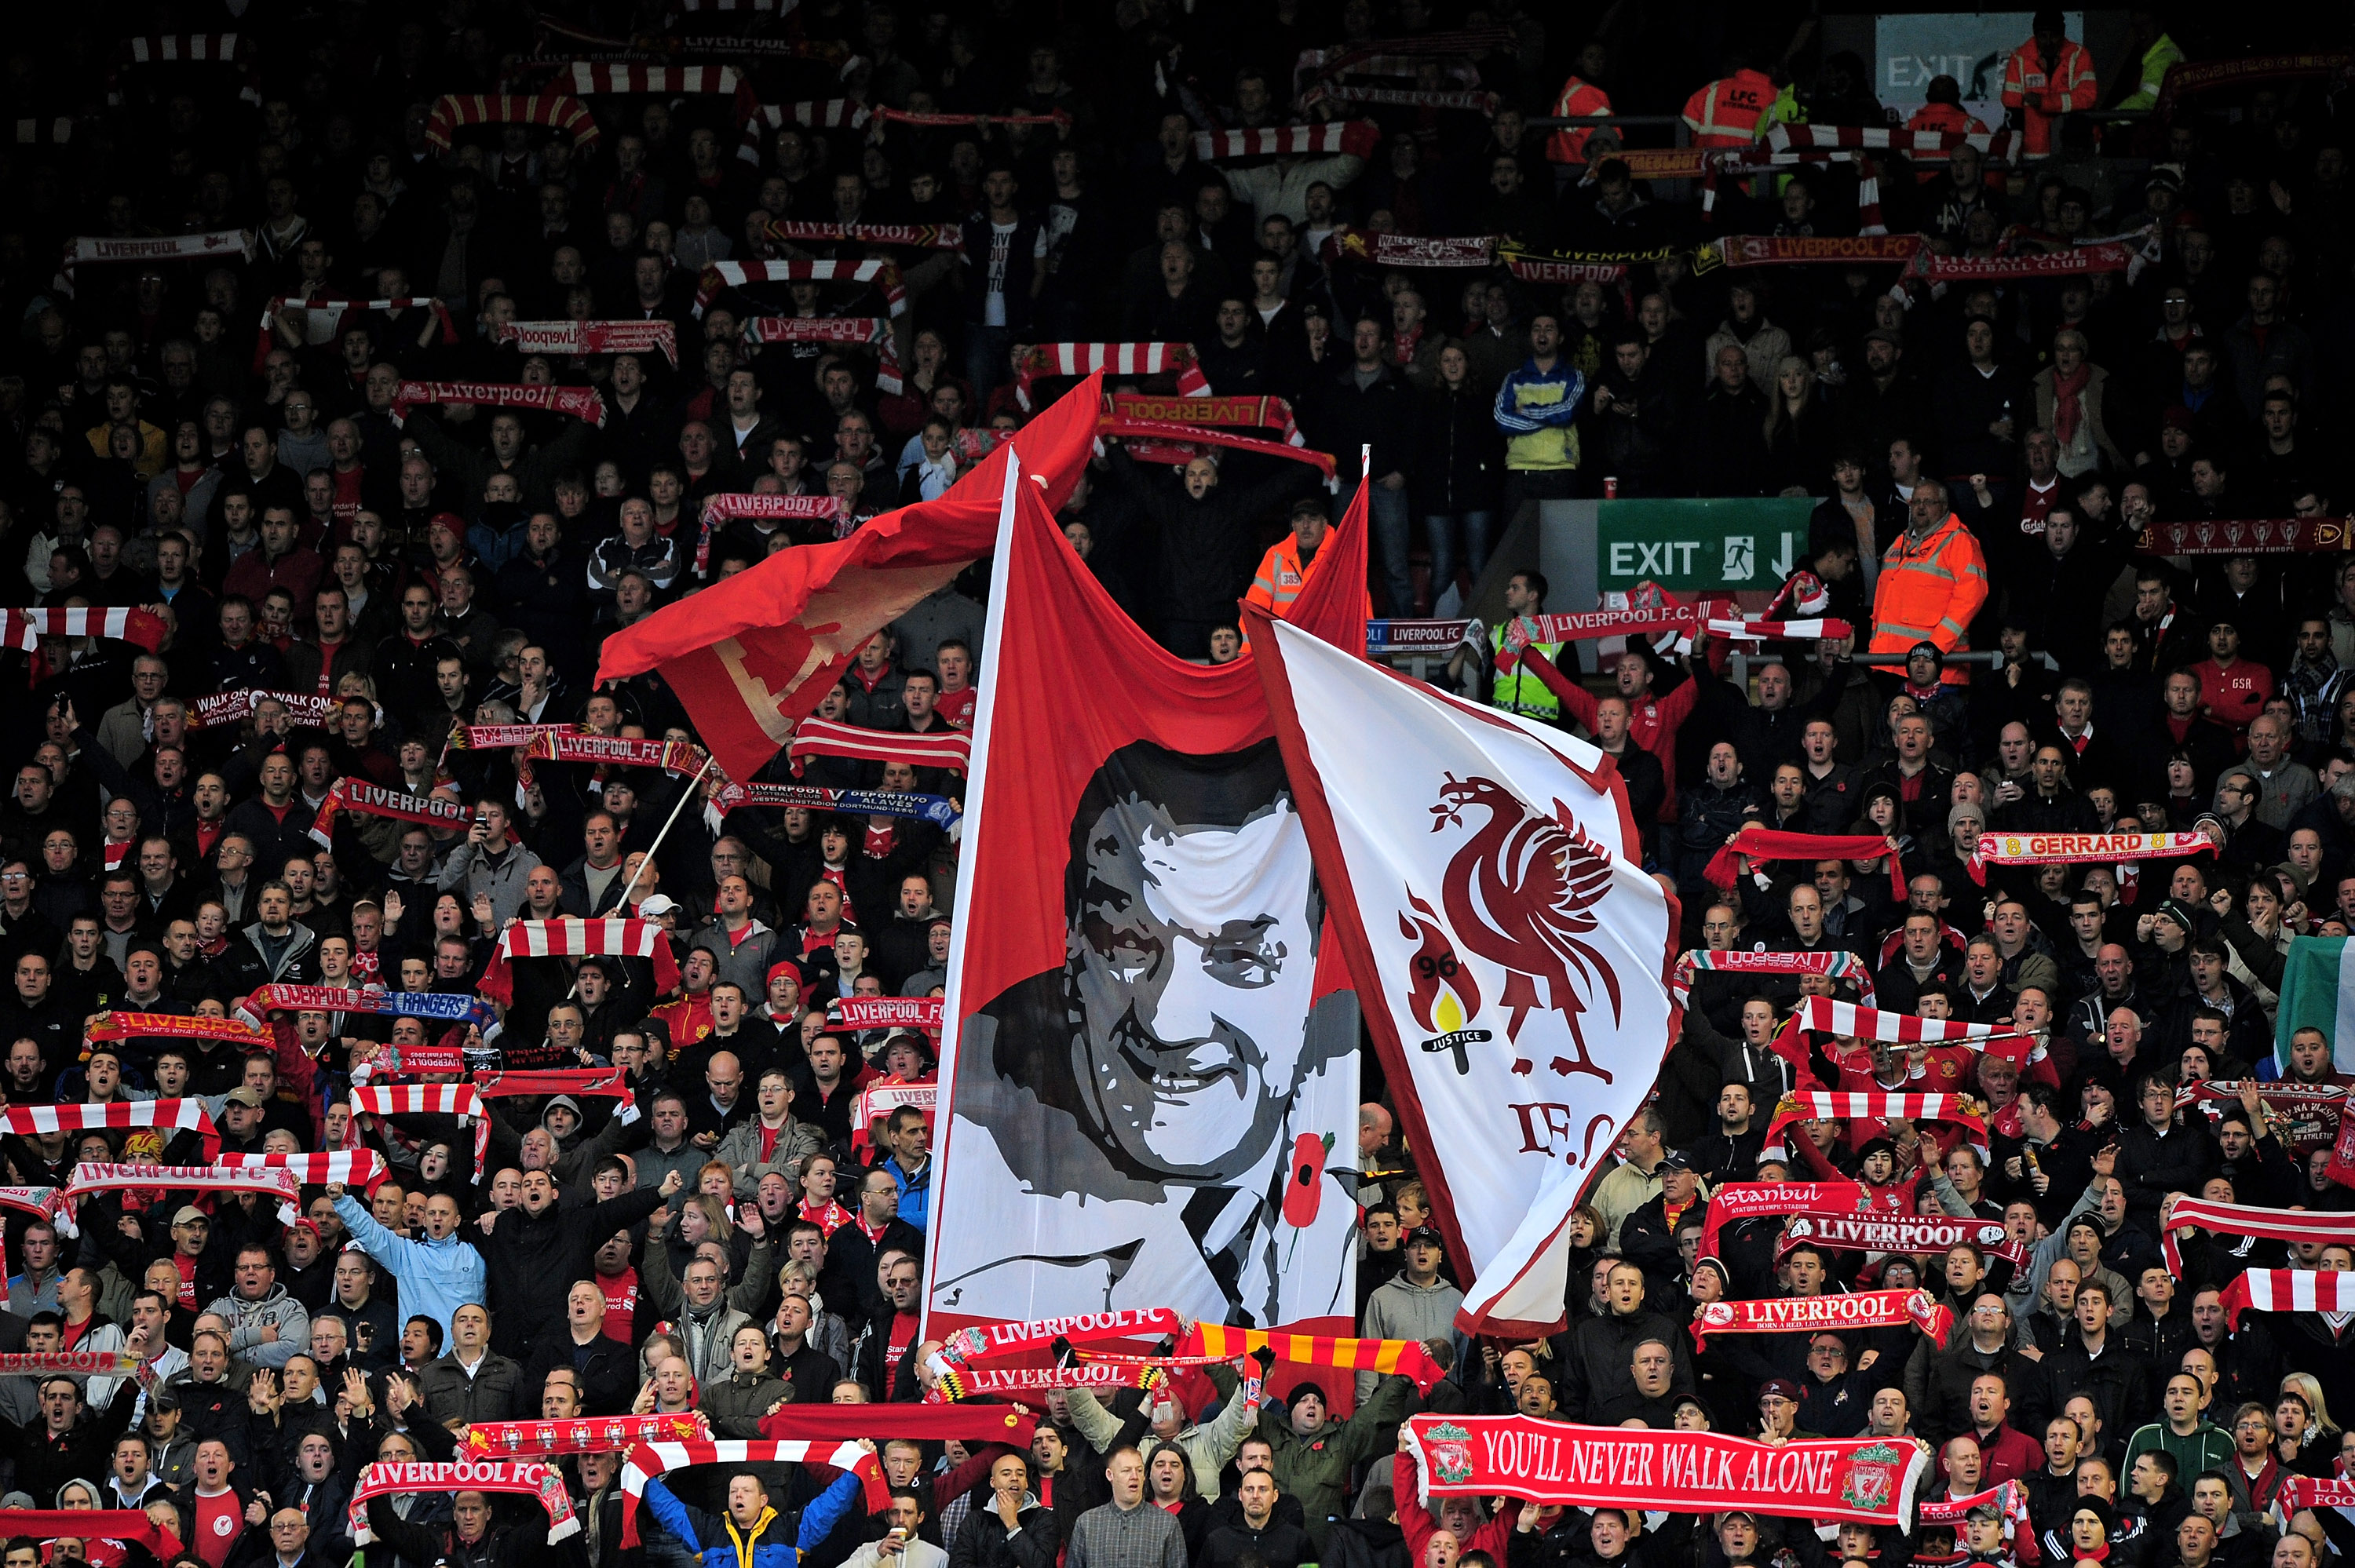 LIVERPOOL, ENGLAND - NOVEMBER 07:  General View of the Kop prior to the Barclays Premier League match between Liverpool and Chelsea at Anfield on November 7, 2010 in Liverpool, England. (Photo by Shaun Botterill/Getty Images)